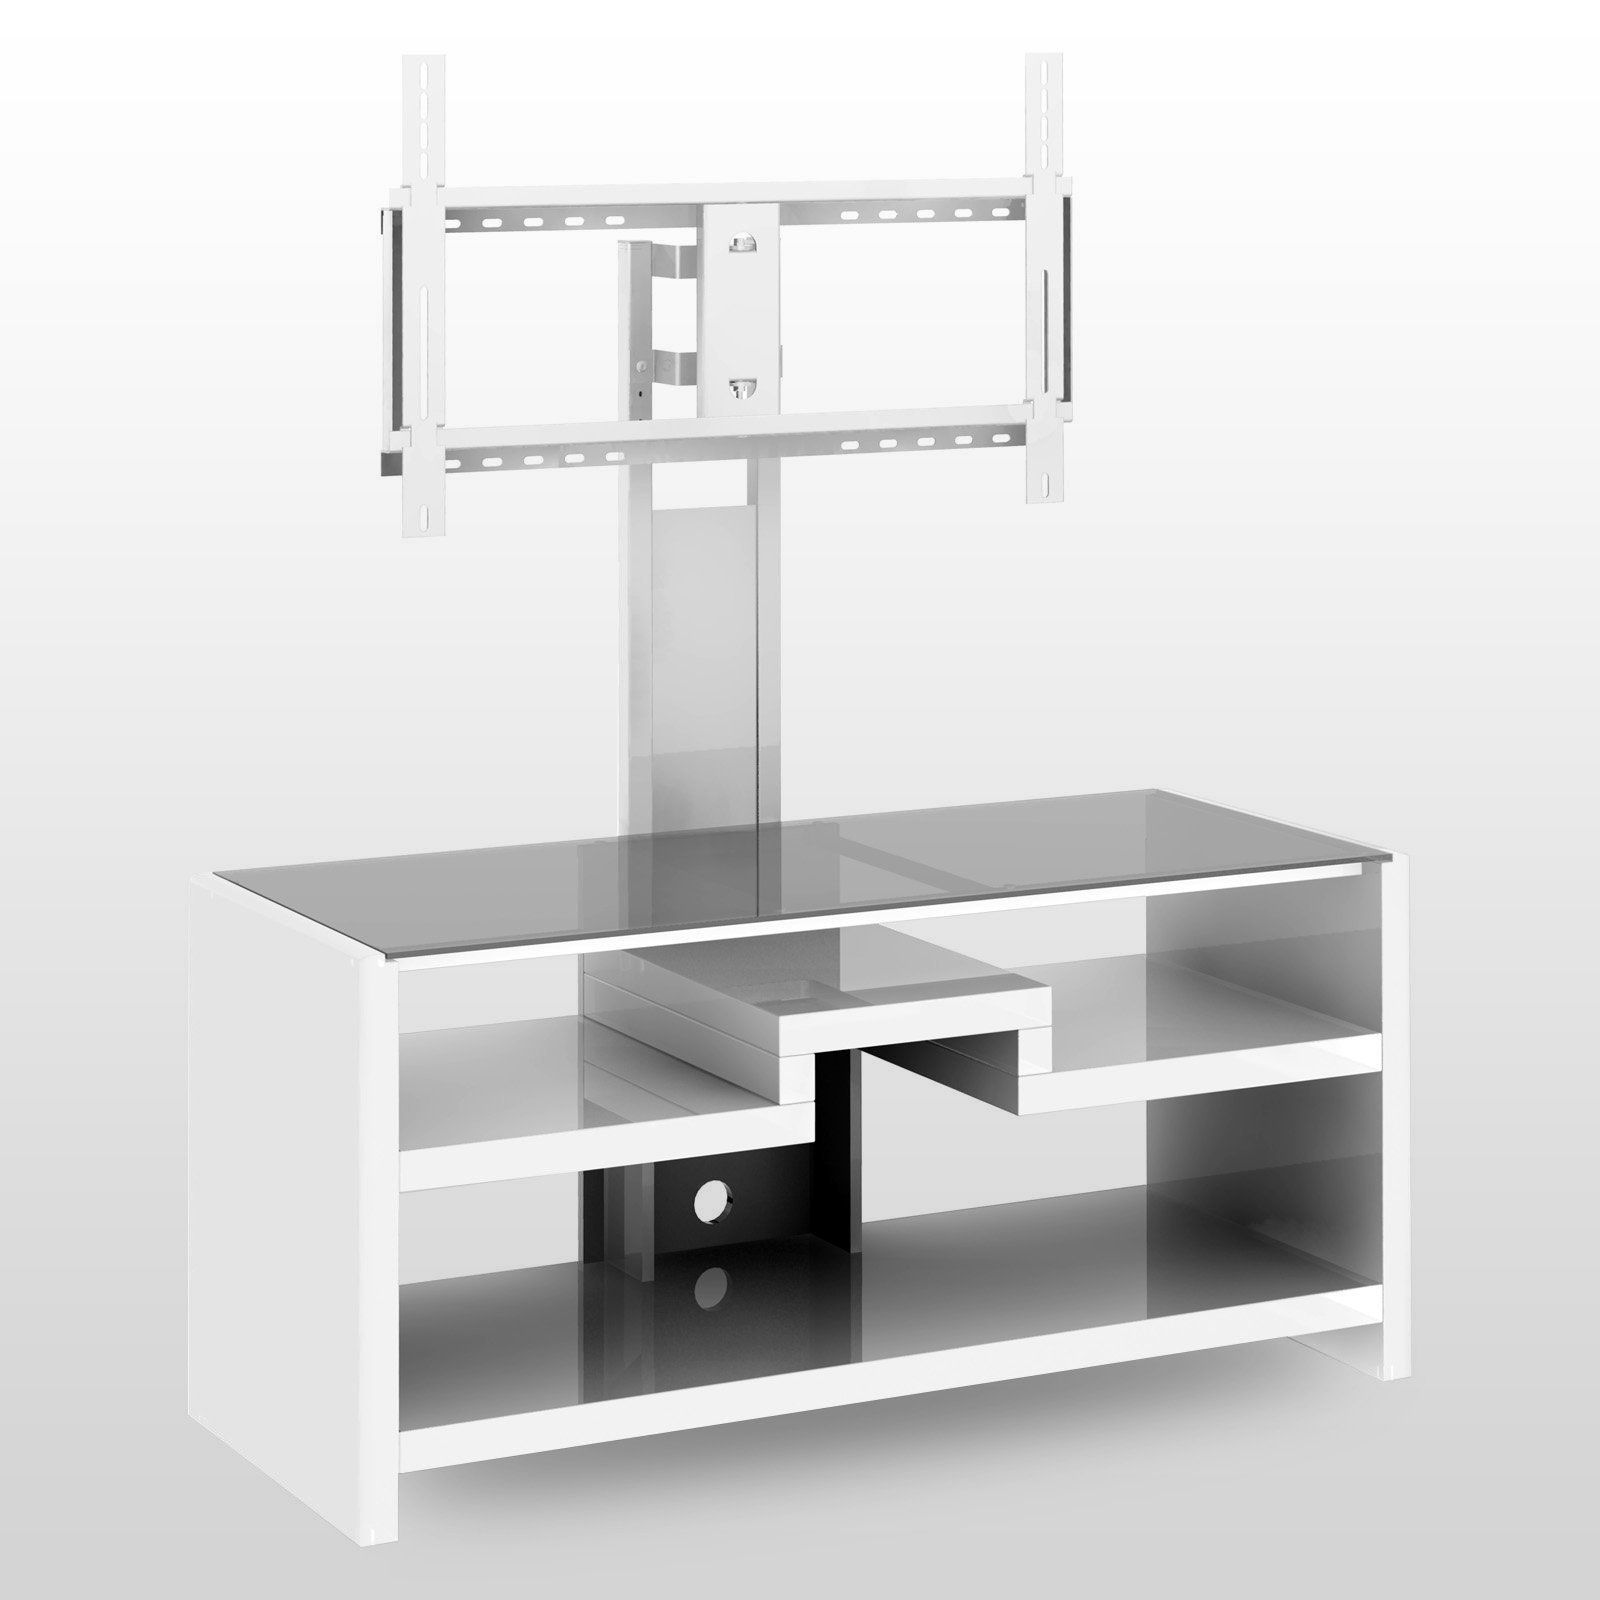 Cool Flat Screen Tv Stands With Mount – Homesfeed In Contemporary Tv Cabinets For Flat Screens (View 15 of 15)